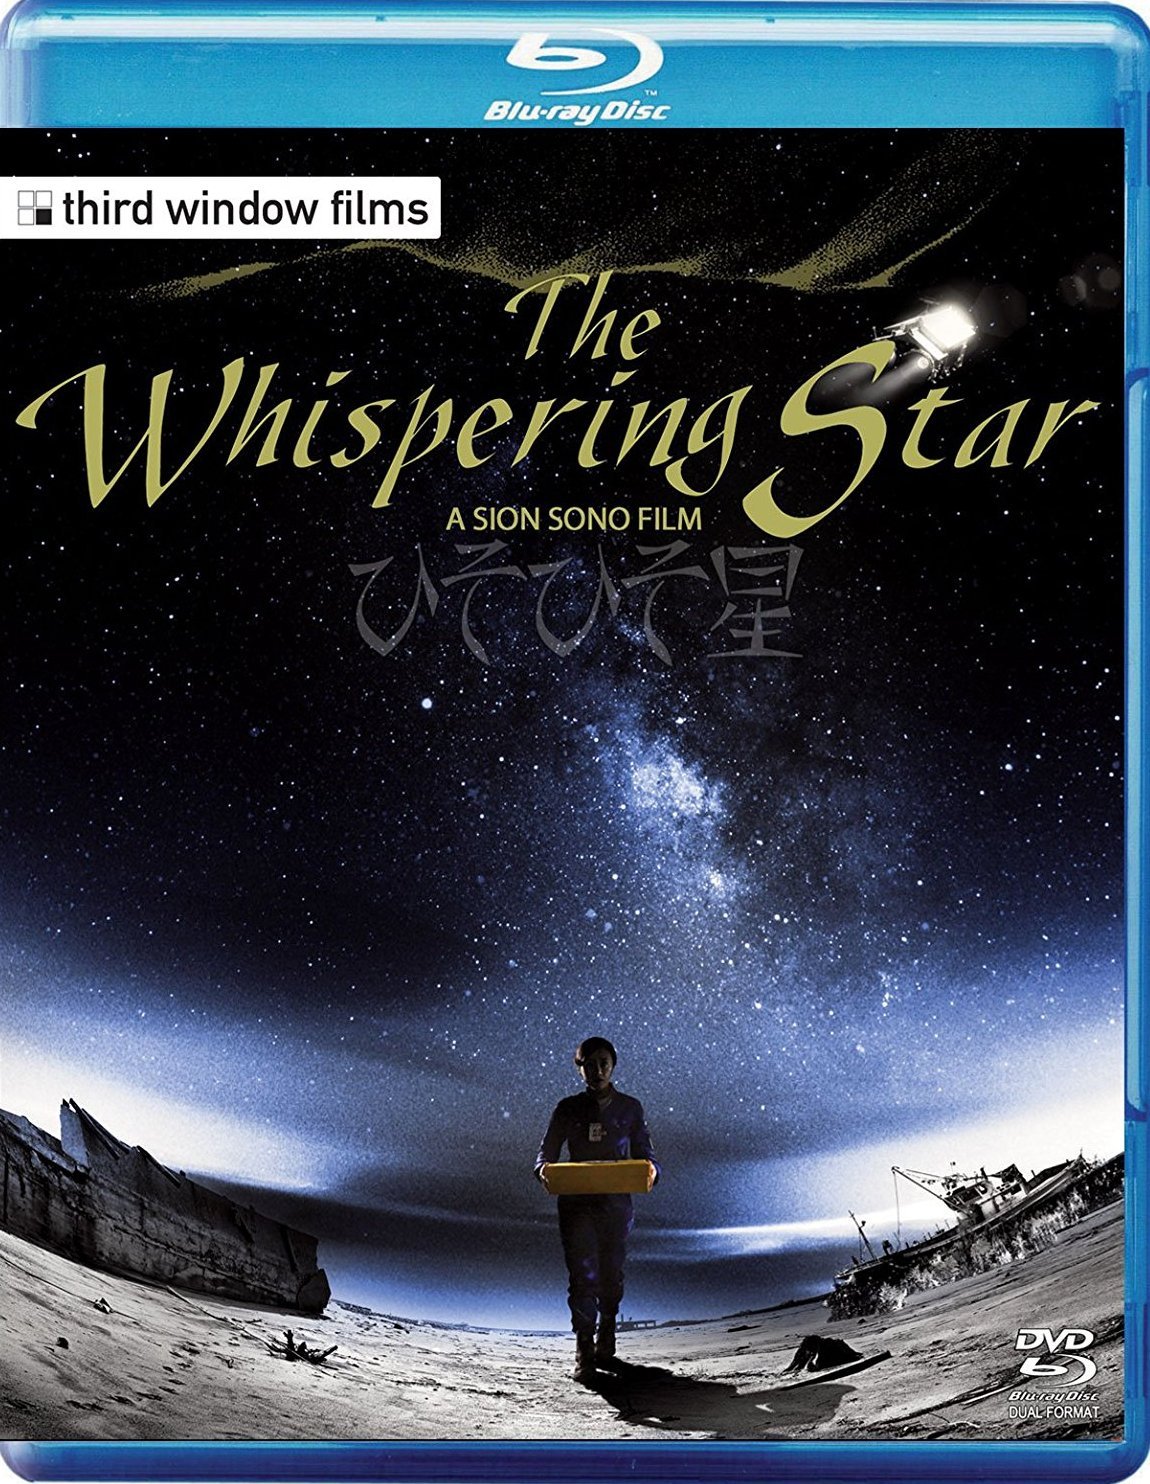 The Whispering Star Blu-ray review: Sion Sono’s artfully elegant spin on memory and mortality